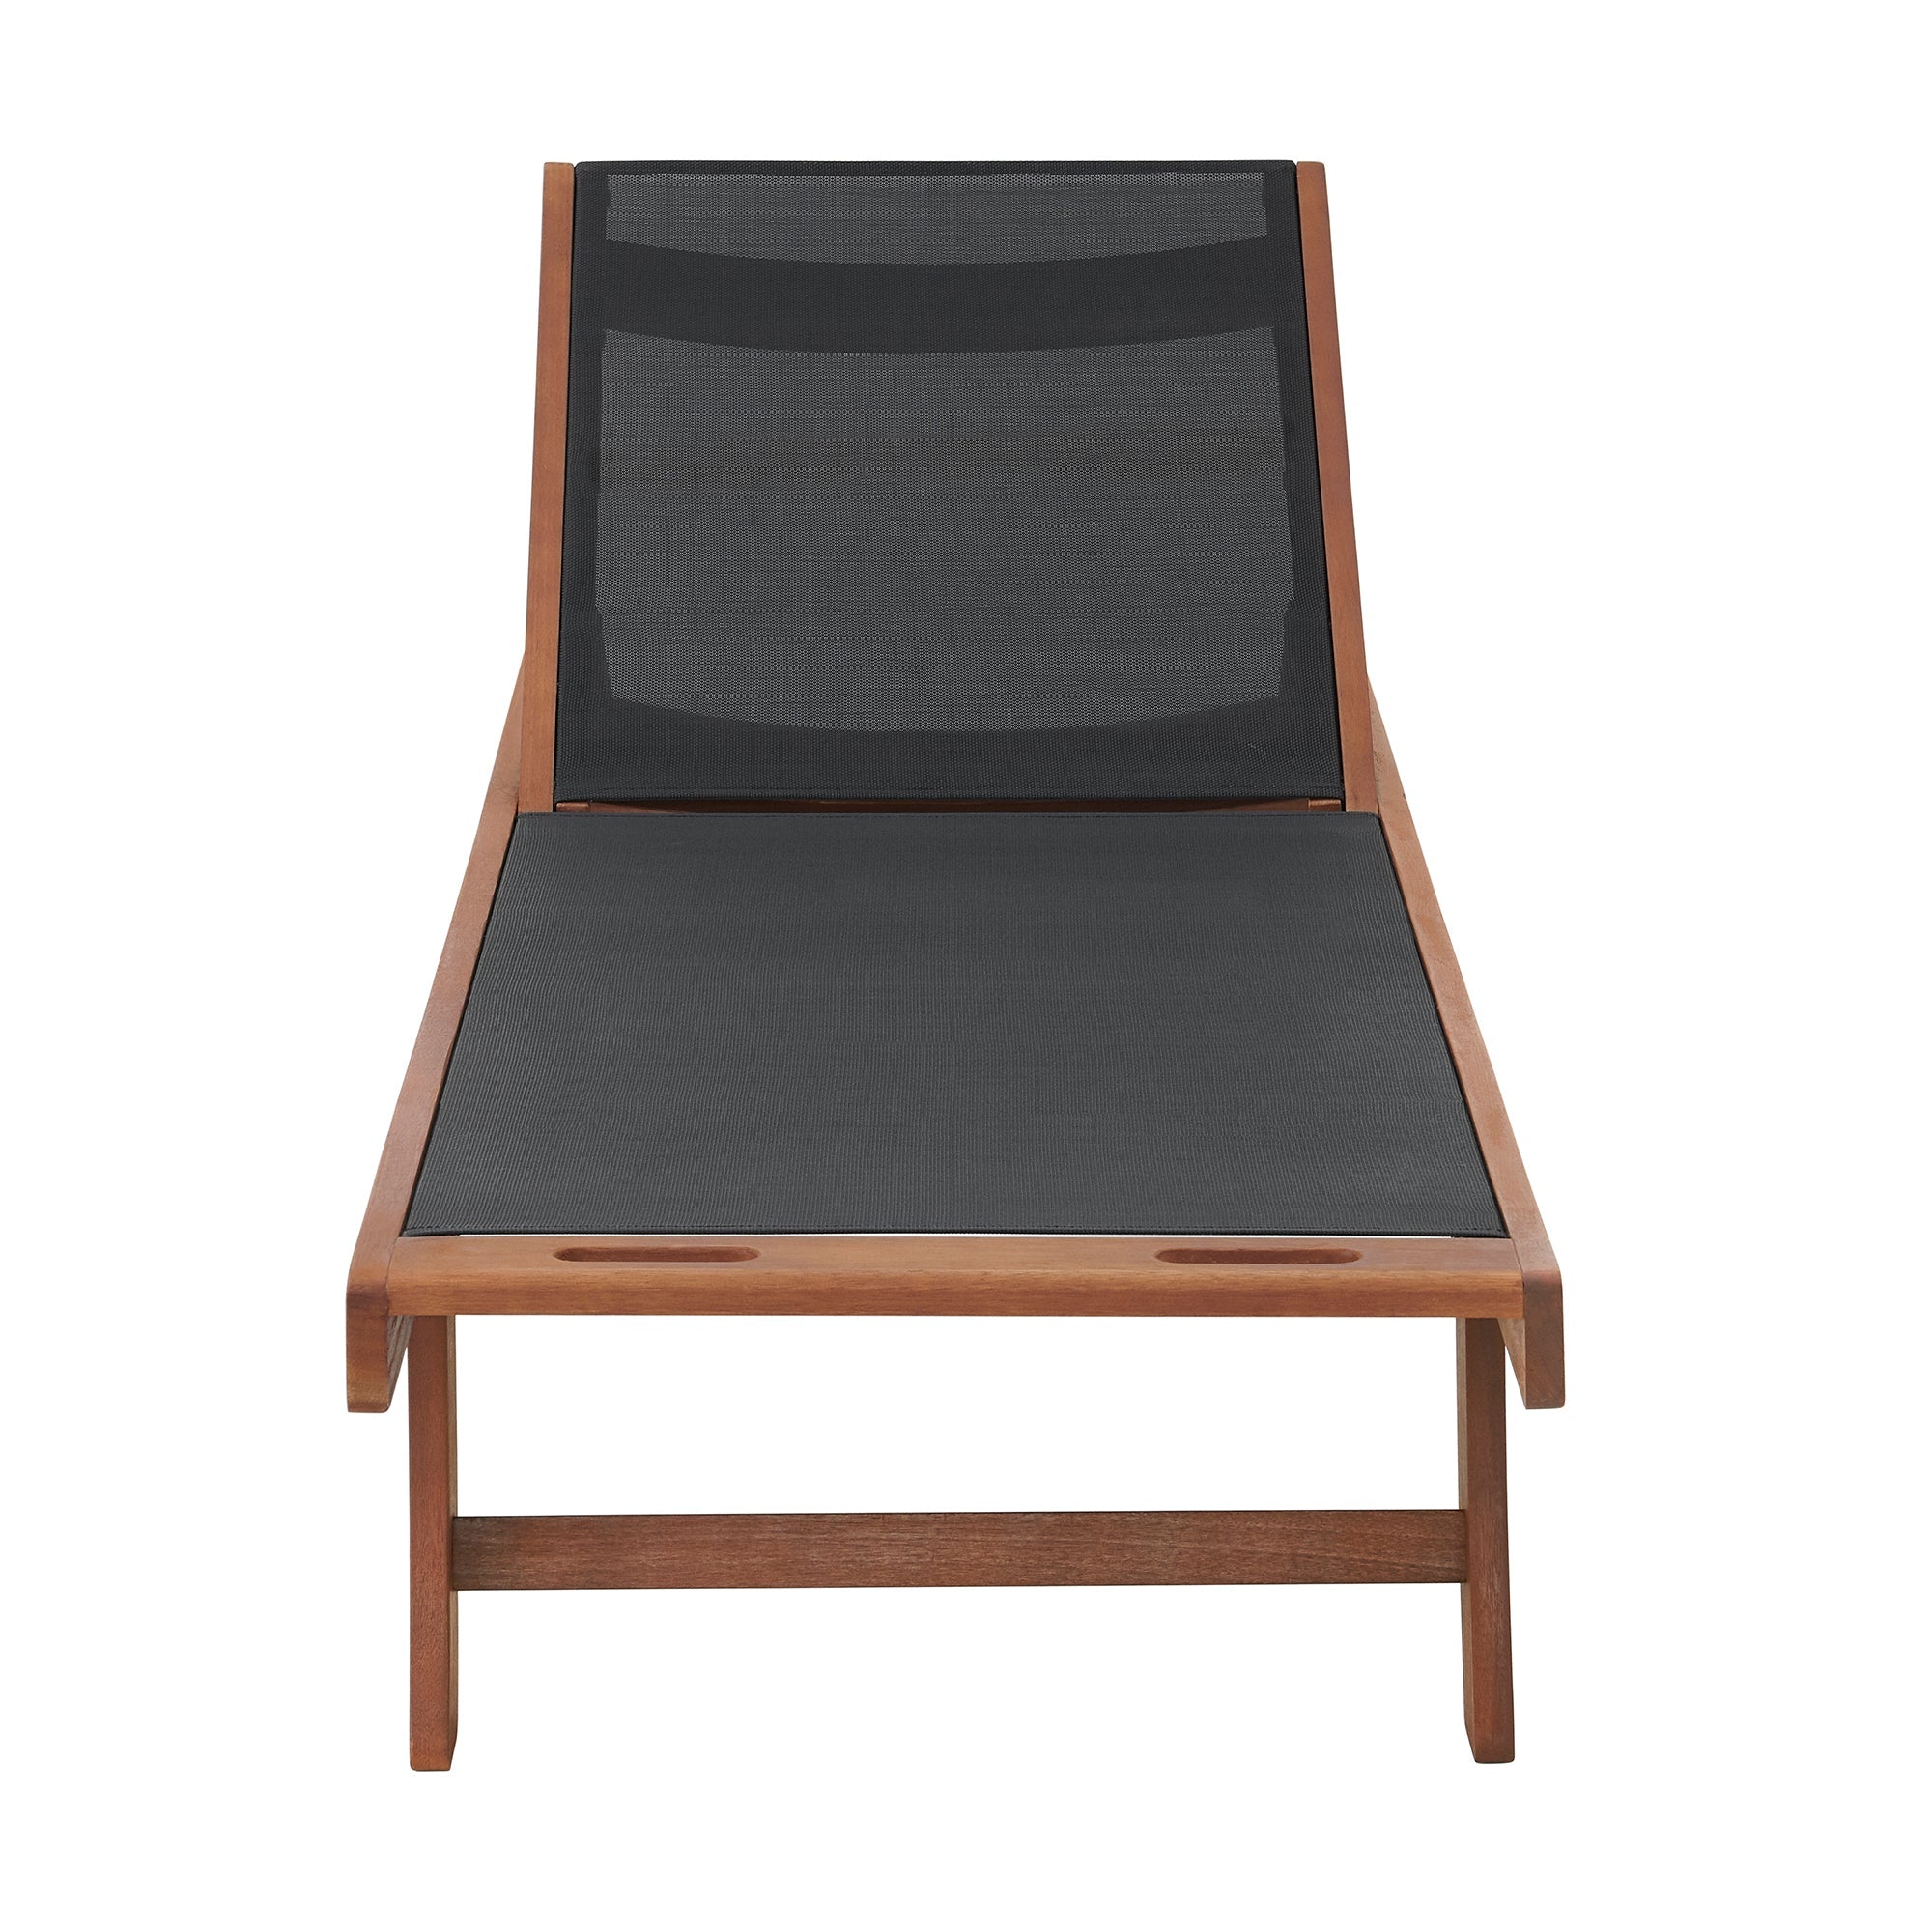 Black Caspian Eucalyptus Wood Outdoor Lounge Chair with Mesh Seating - Pier 1